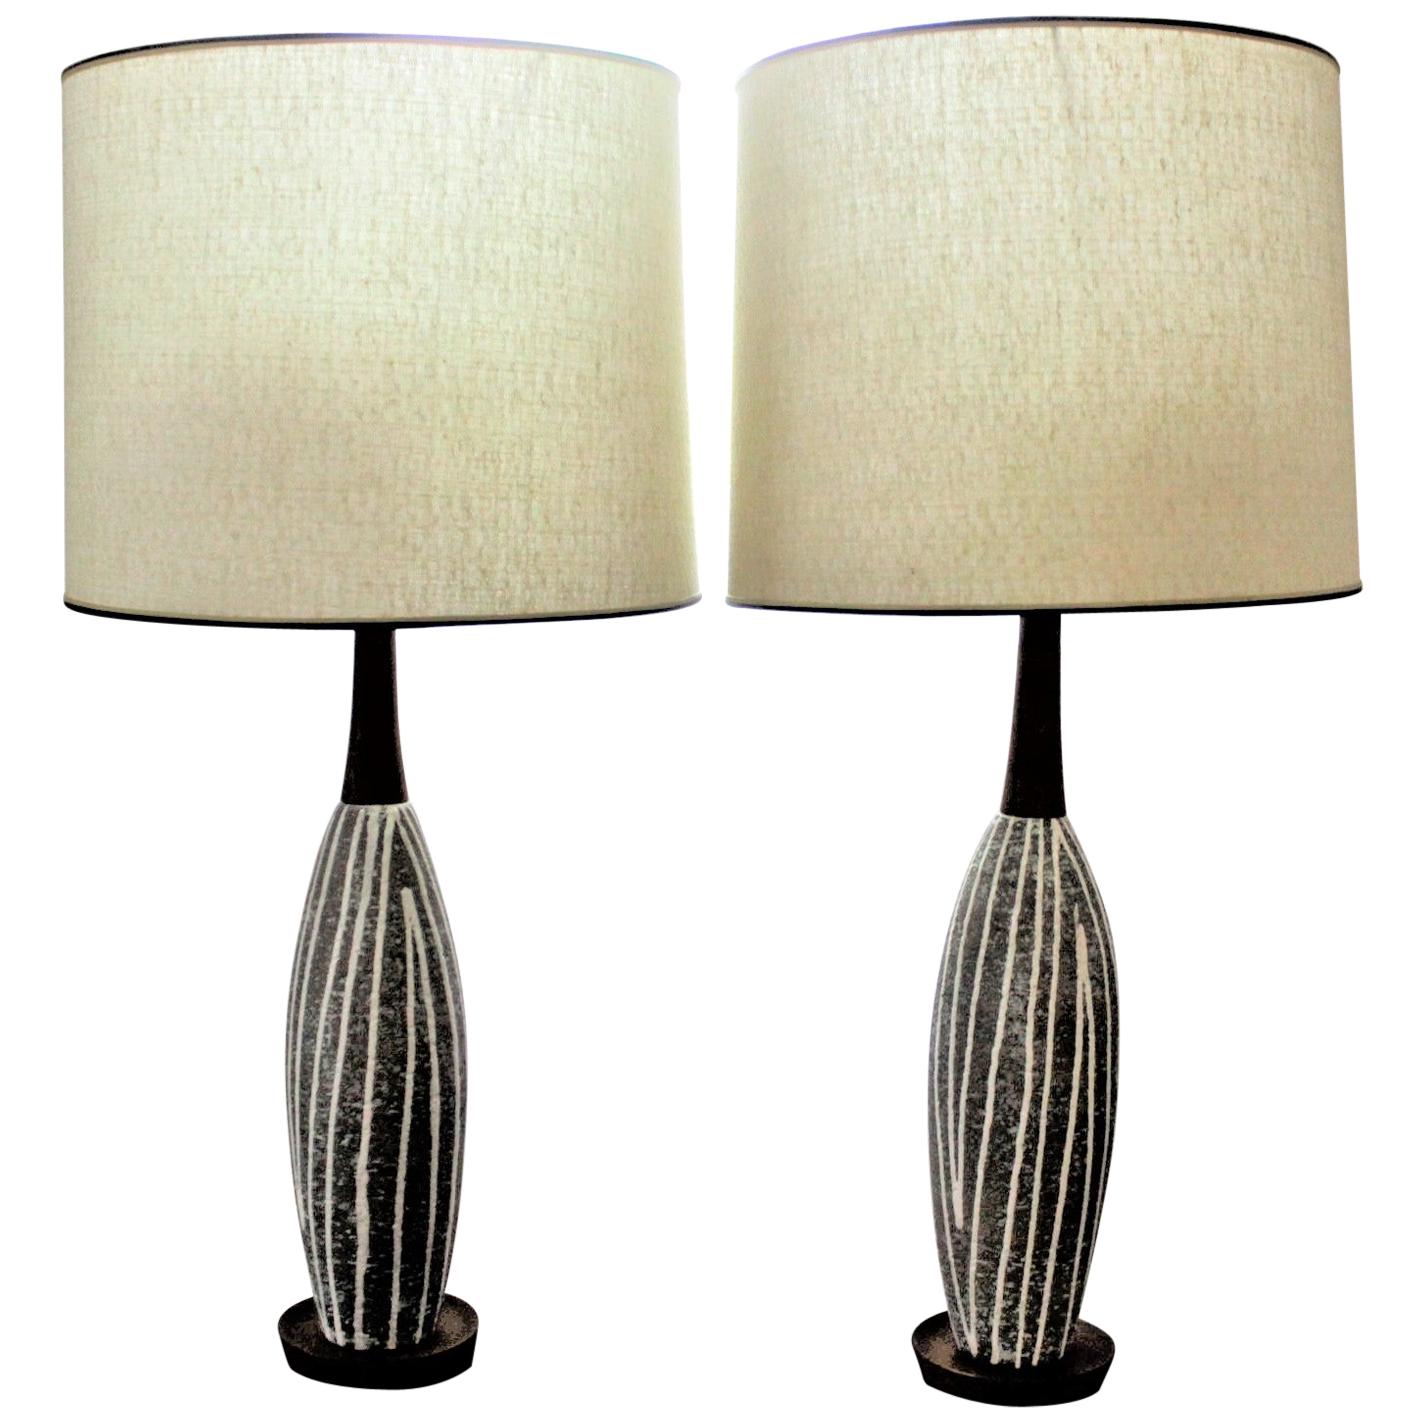 Pair of Upsala Ekeby Mid-Century Modern Pottery Table Lamps & Original Shades For Sale